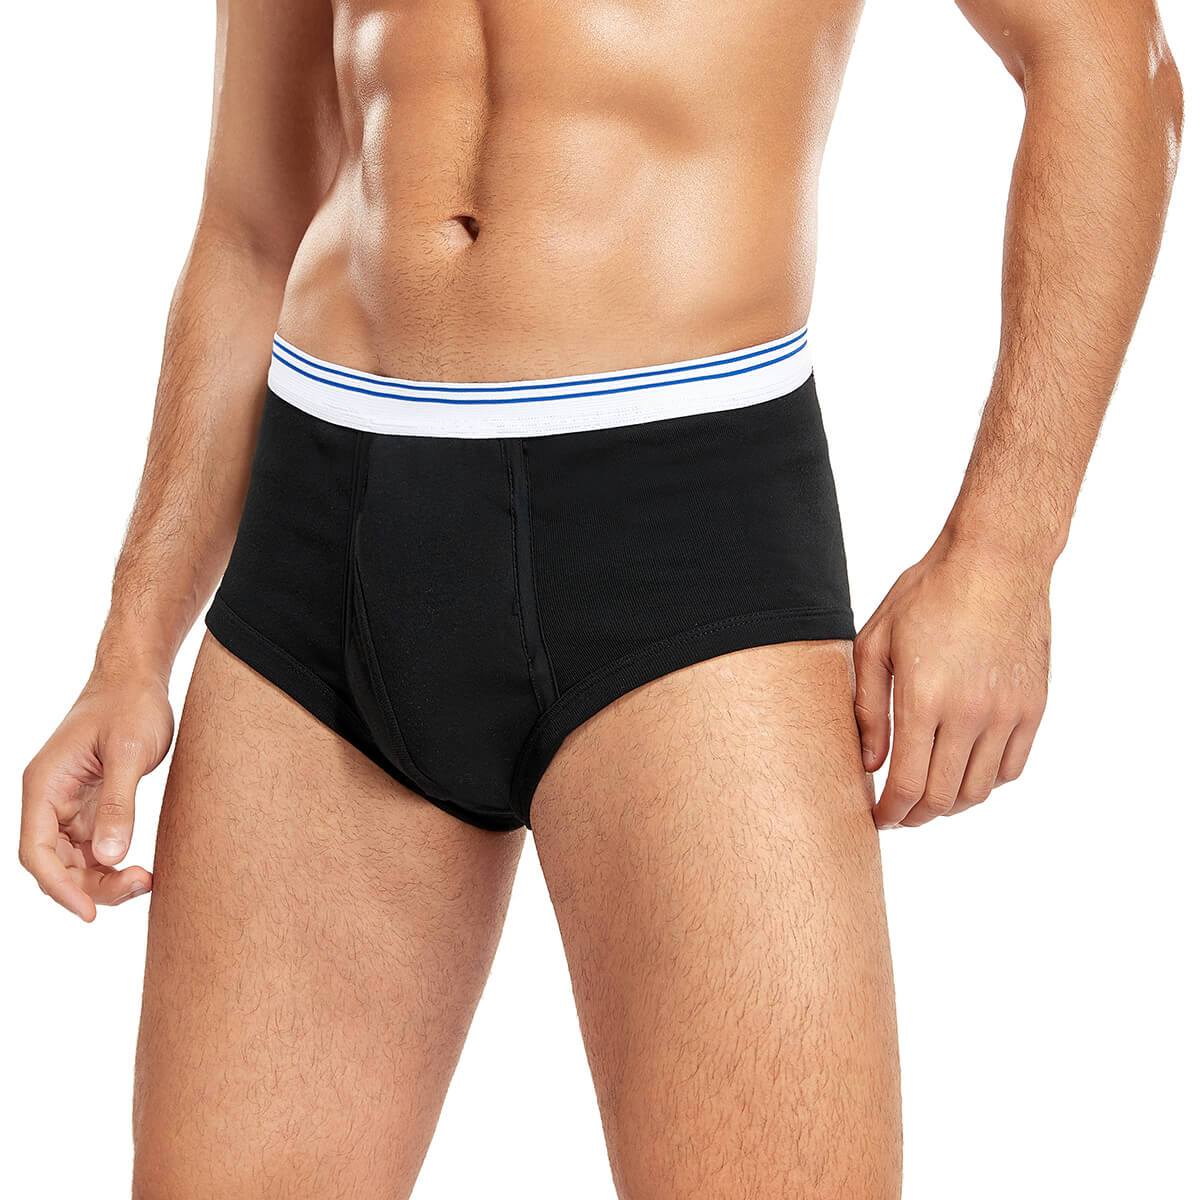 Men's Washable Incontinence Briefs with Fly - M65